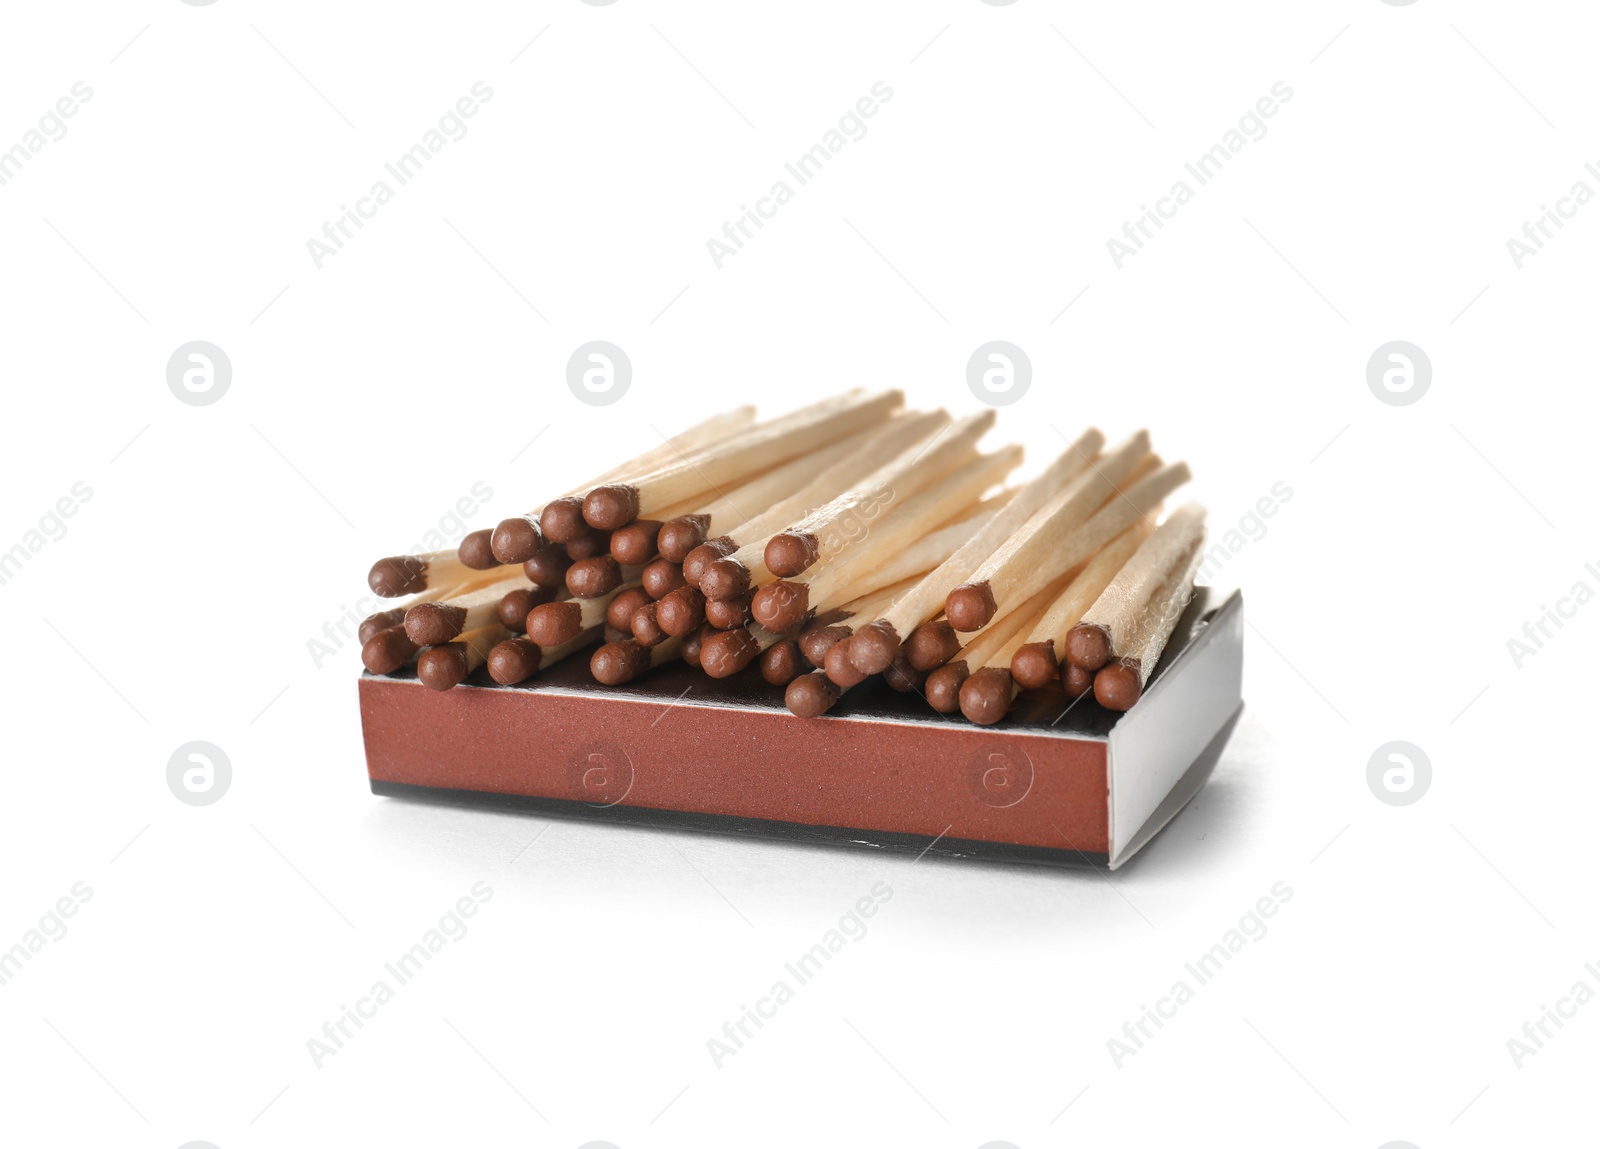 Photo of Cardboard box with matches on white background